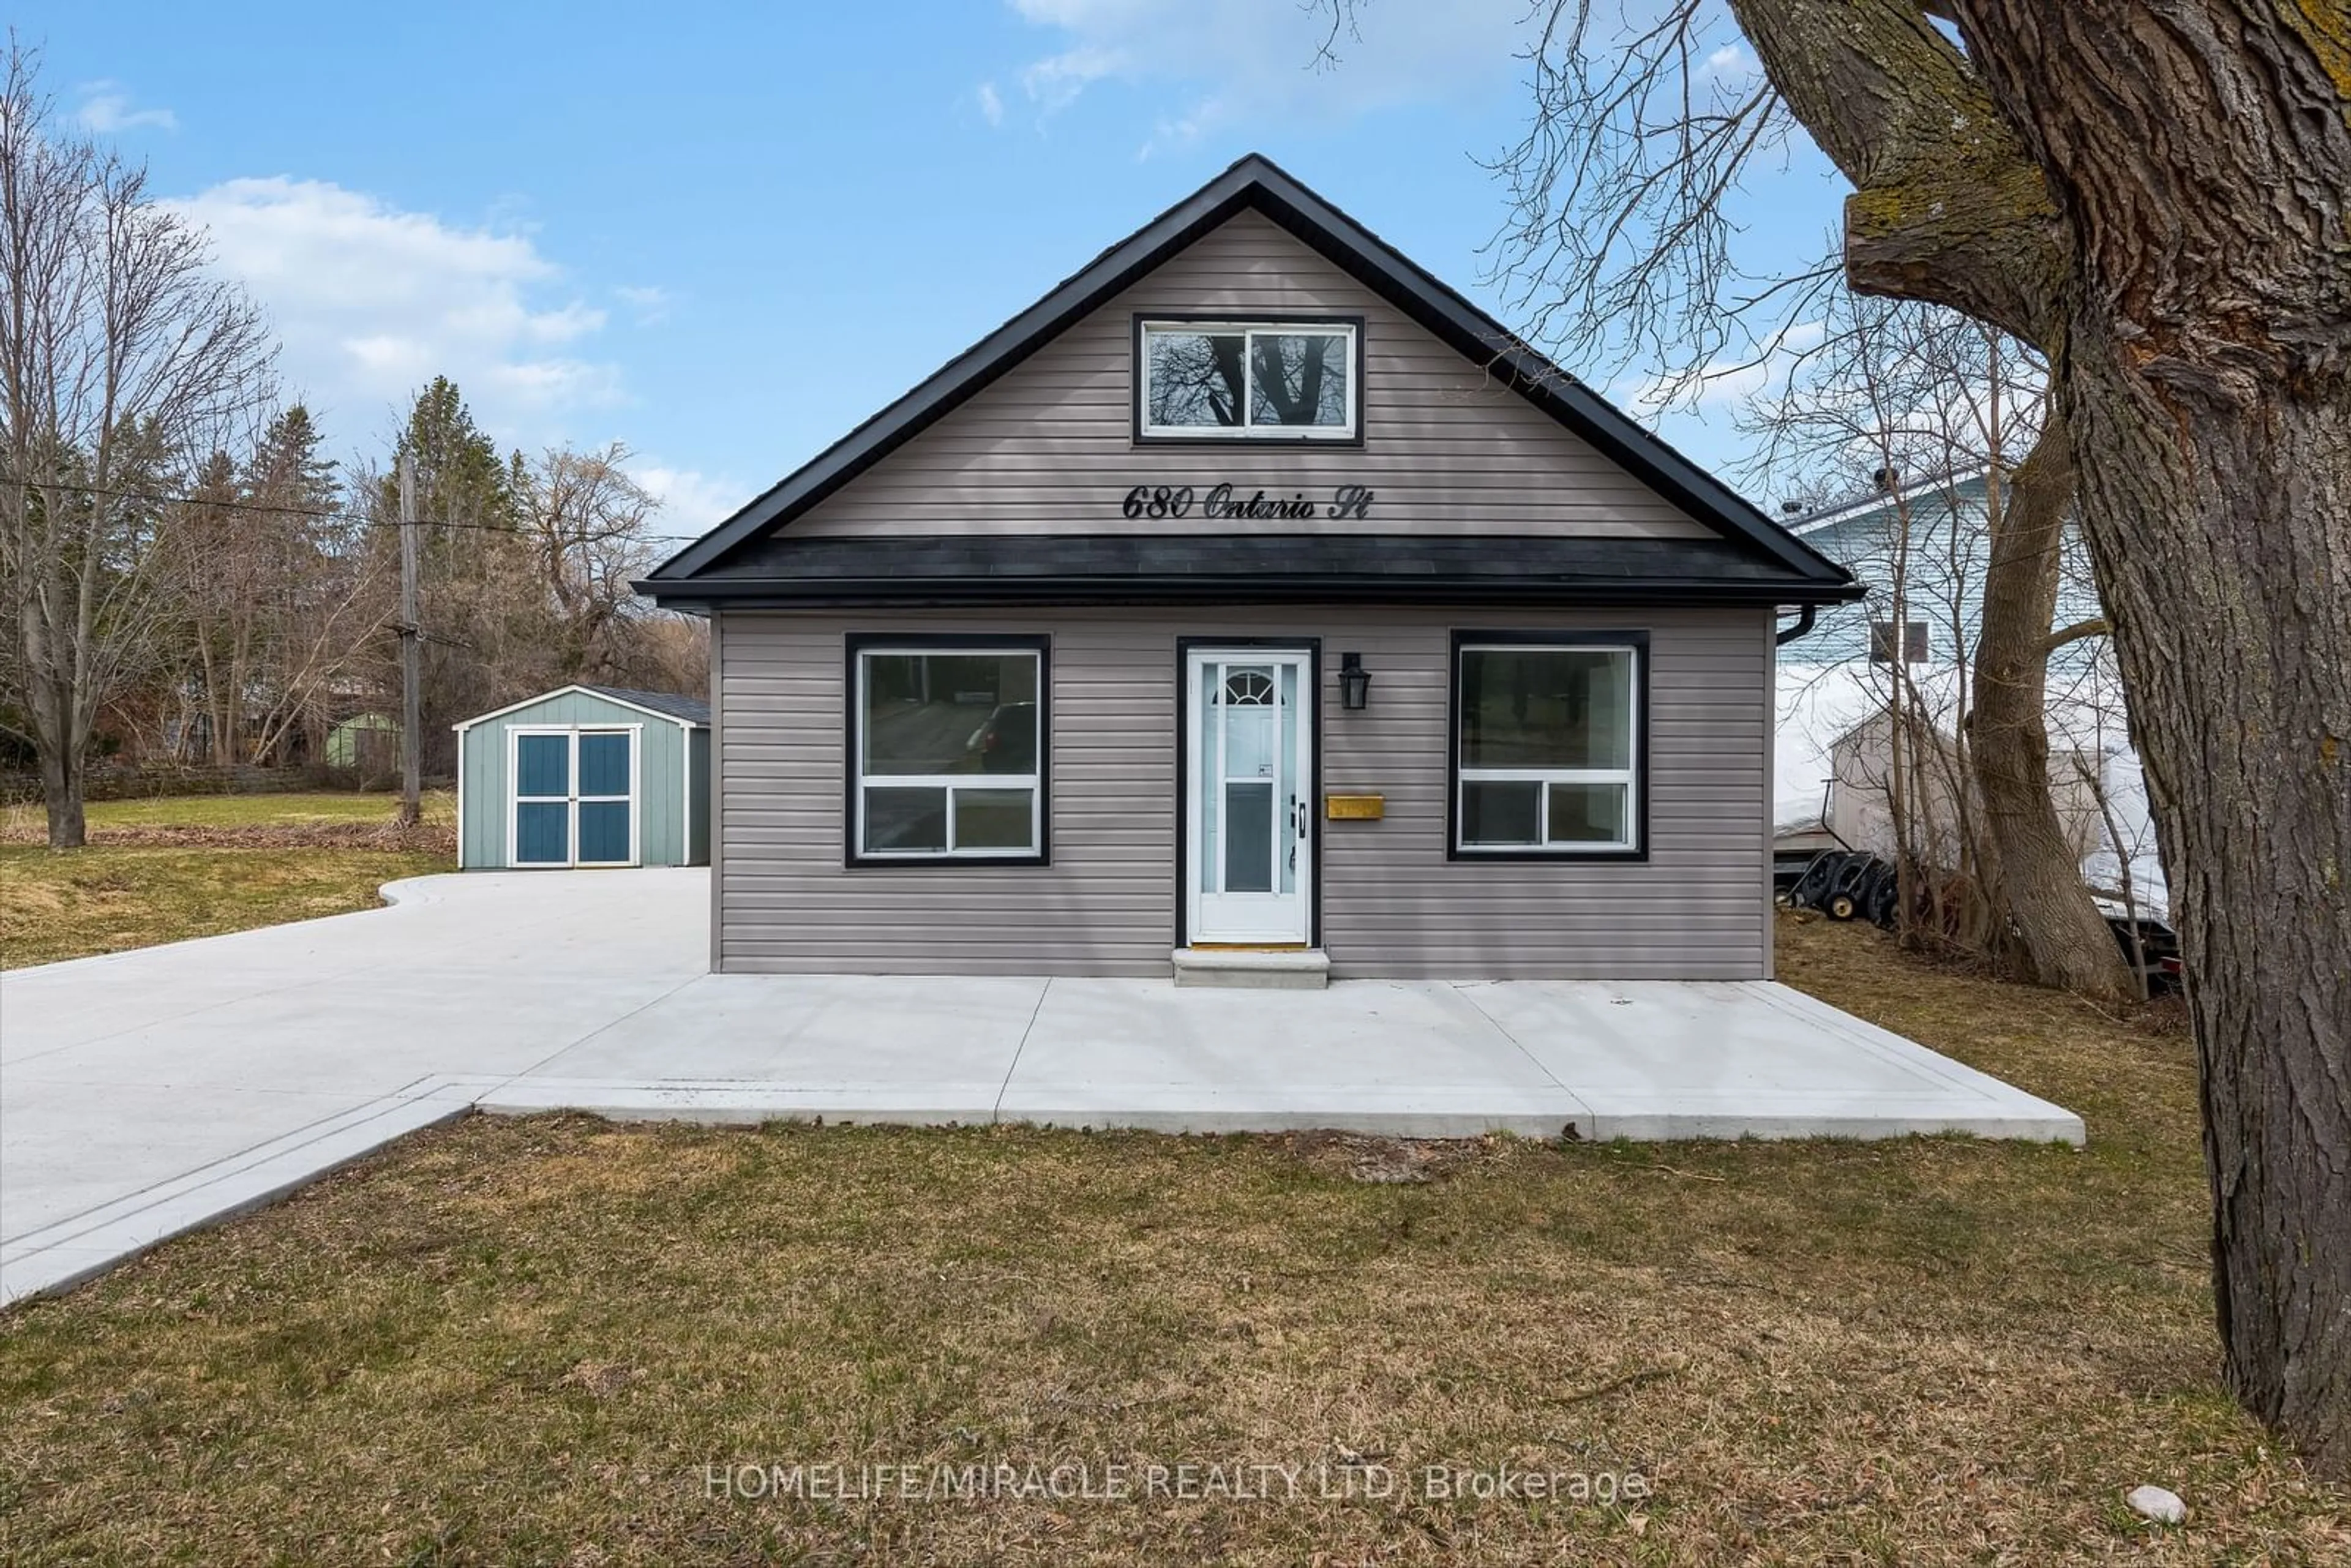 Frontside or backside of a home for 680 Ontario St, Midland Ontario L4R 1A4